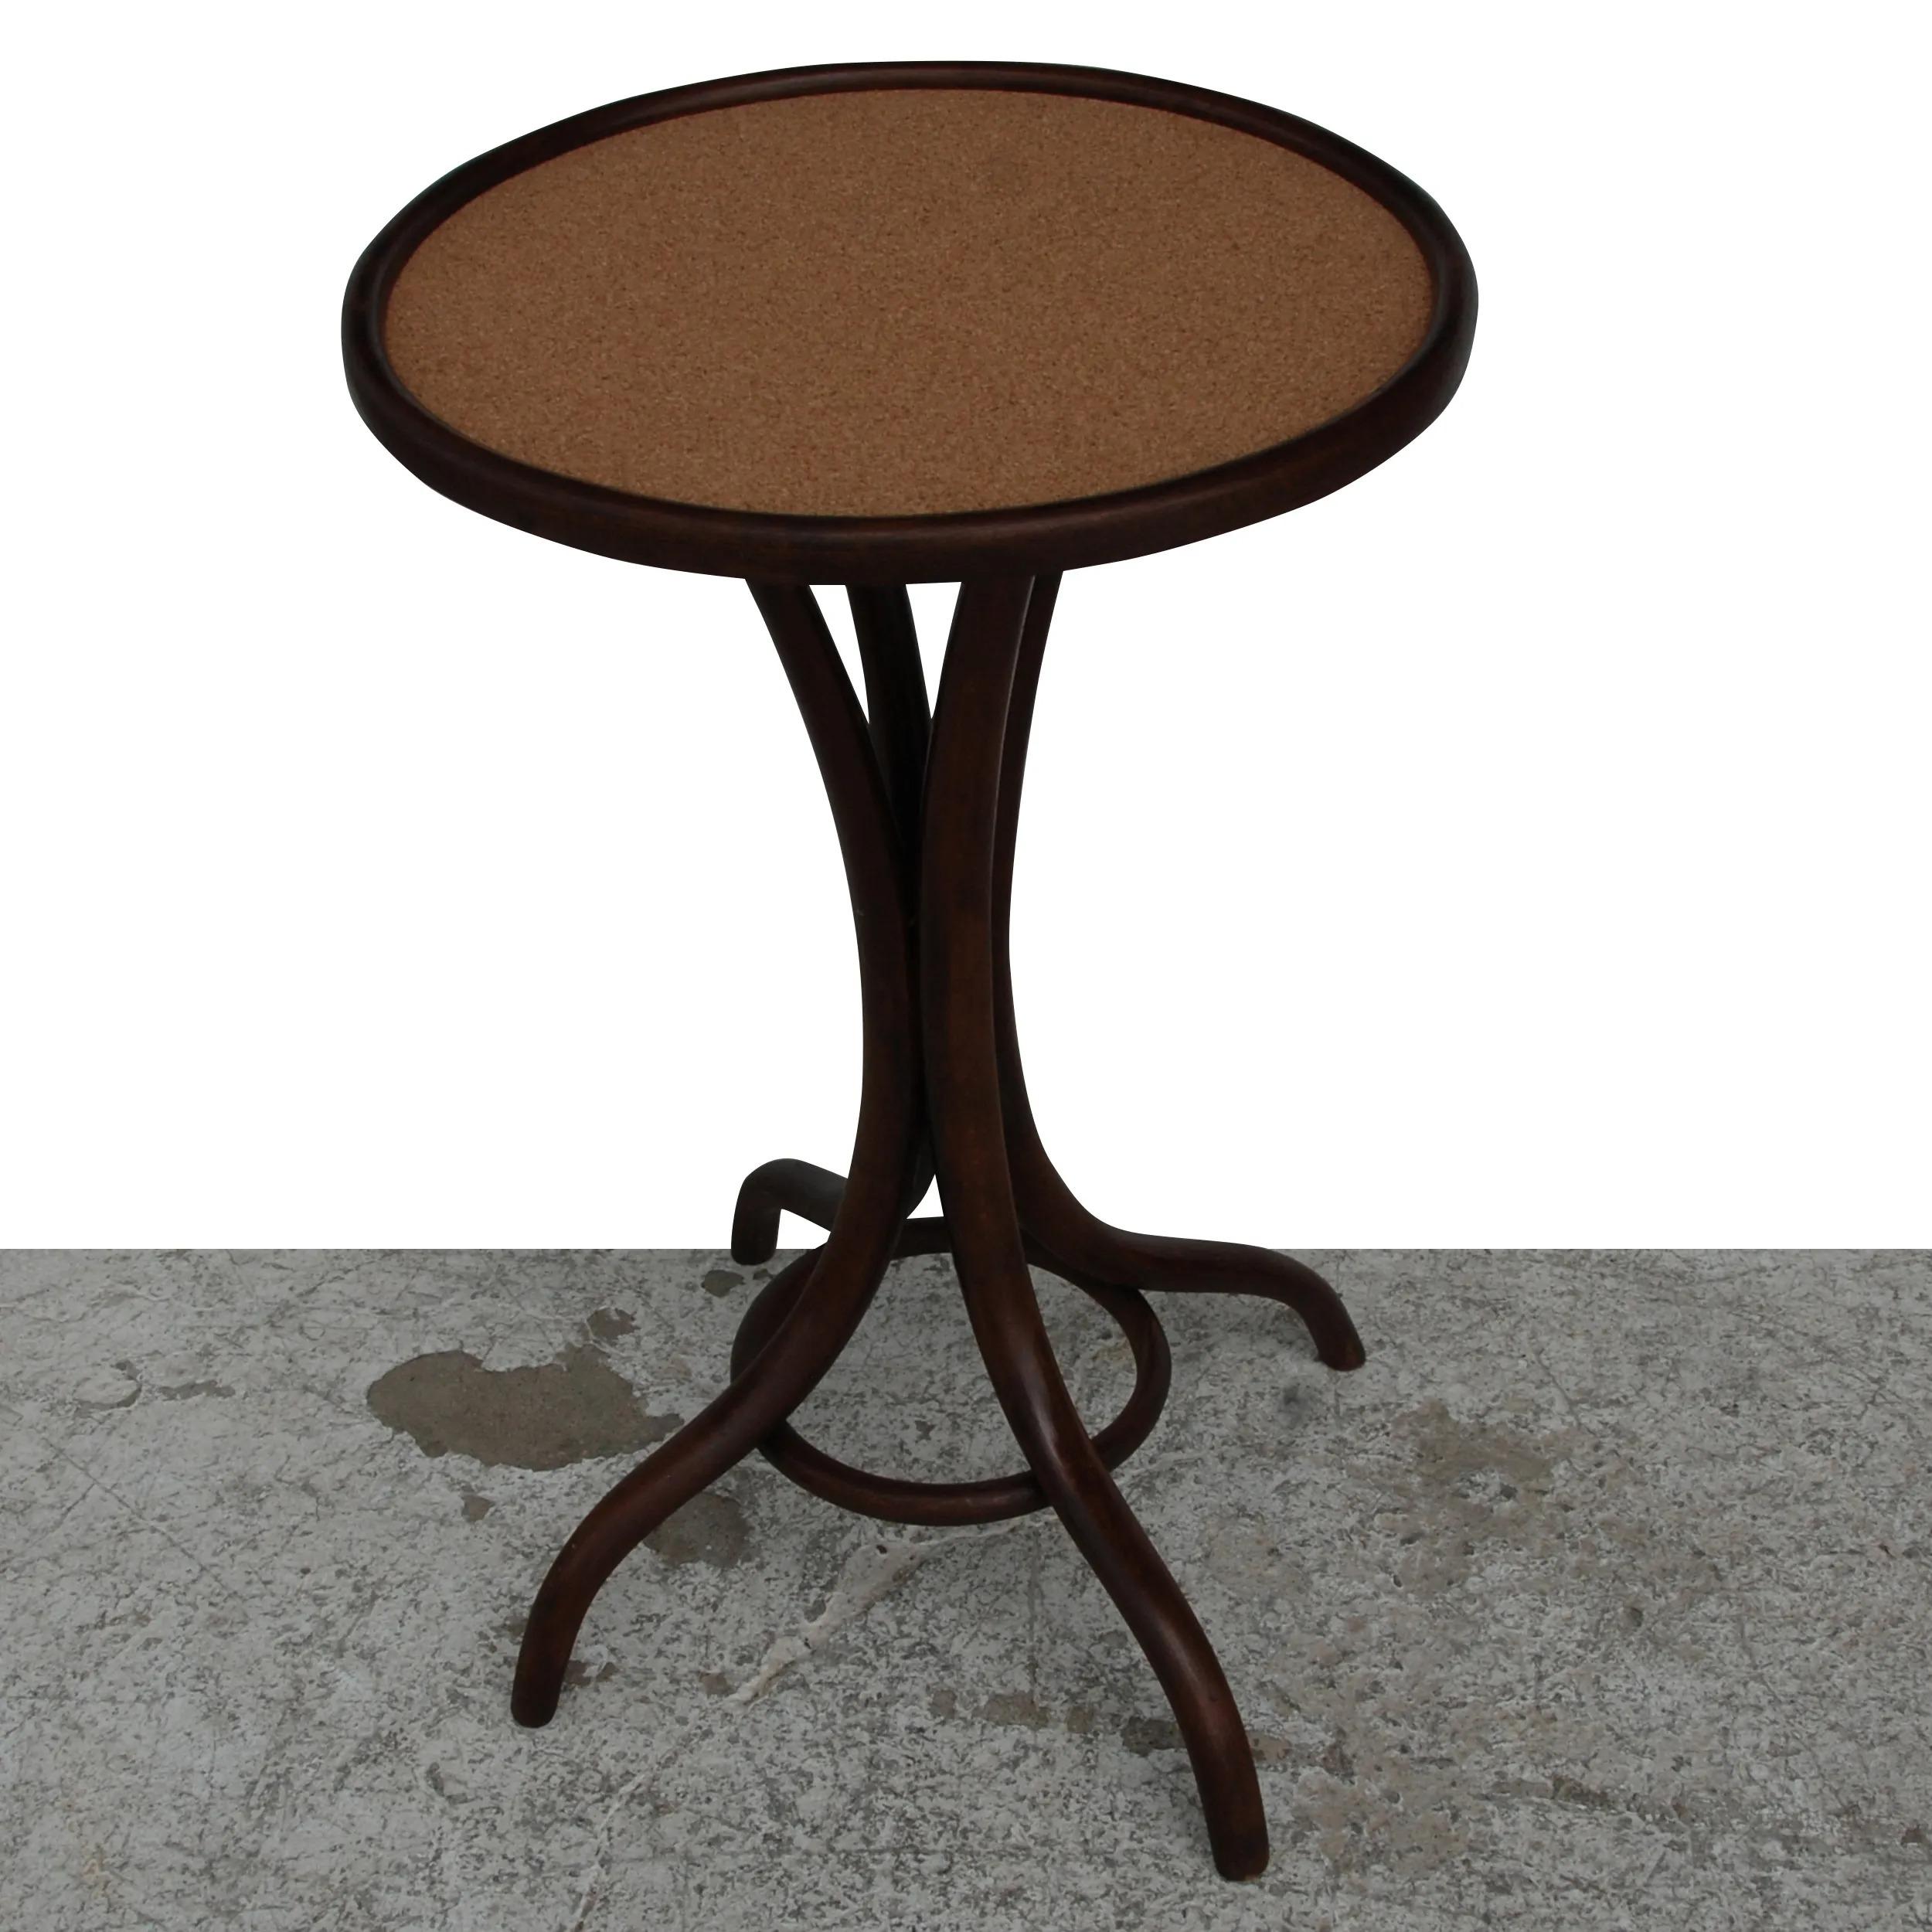 Early Thonet Pedestal Table with Cork Top 1